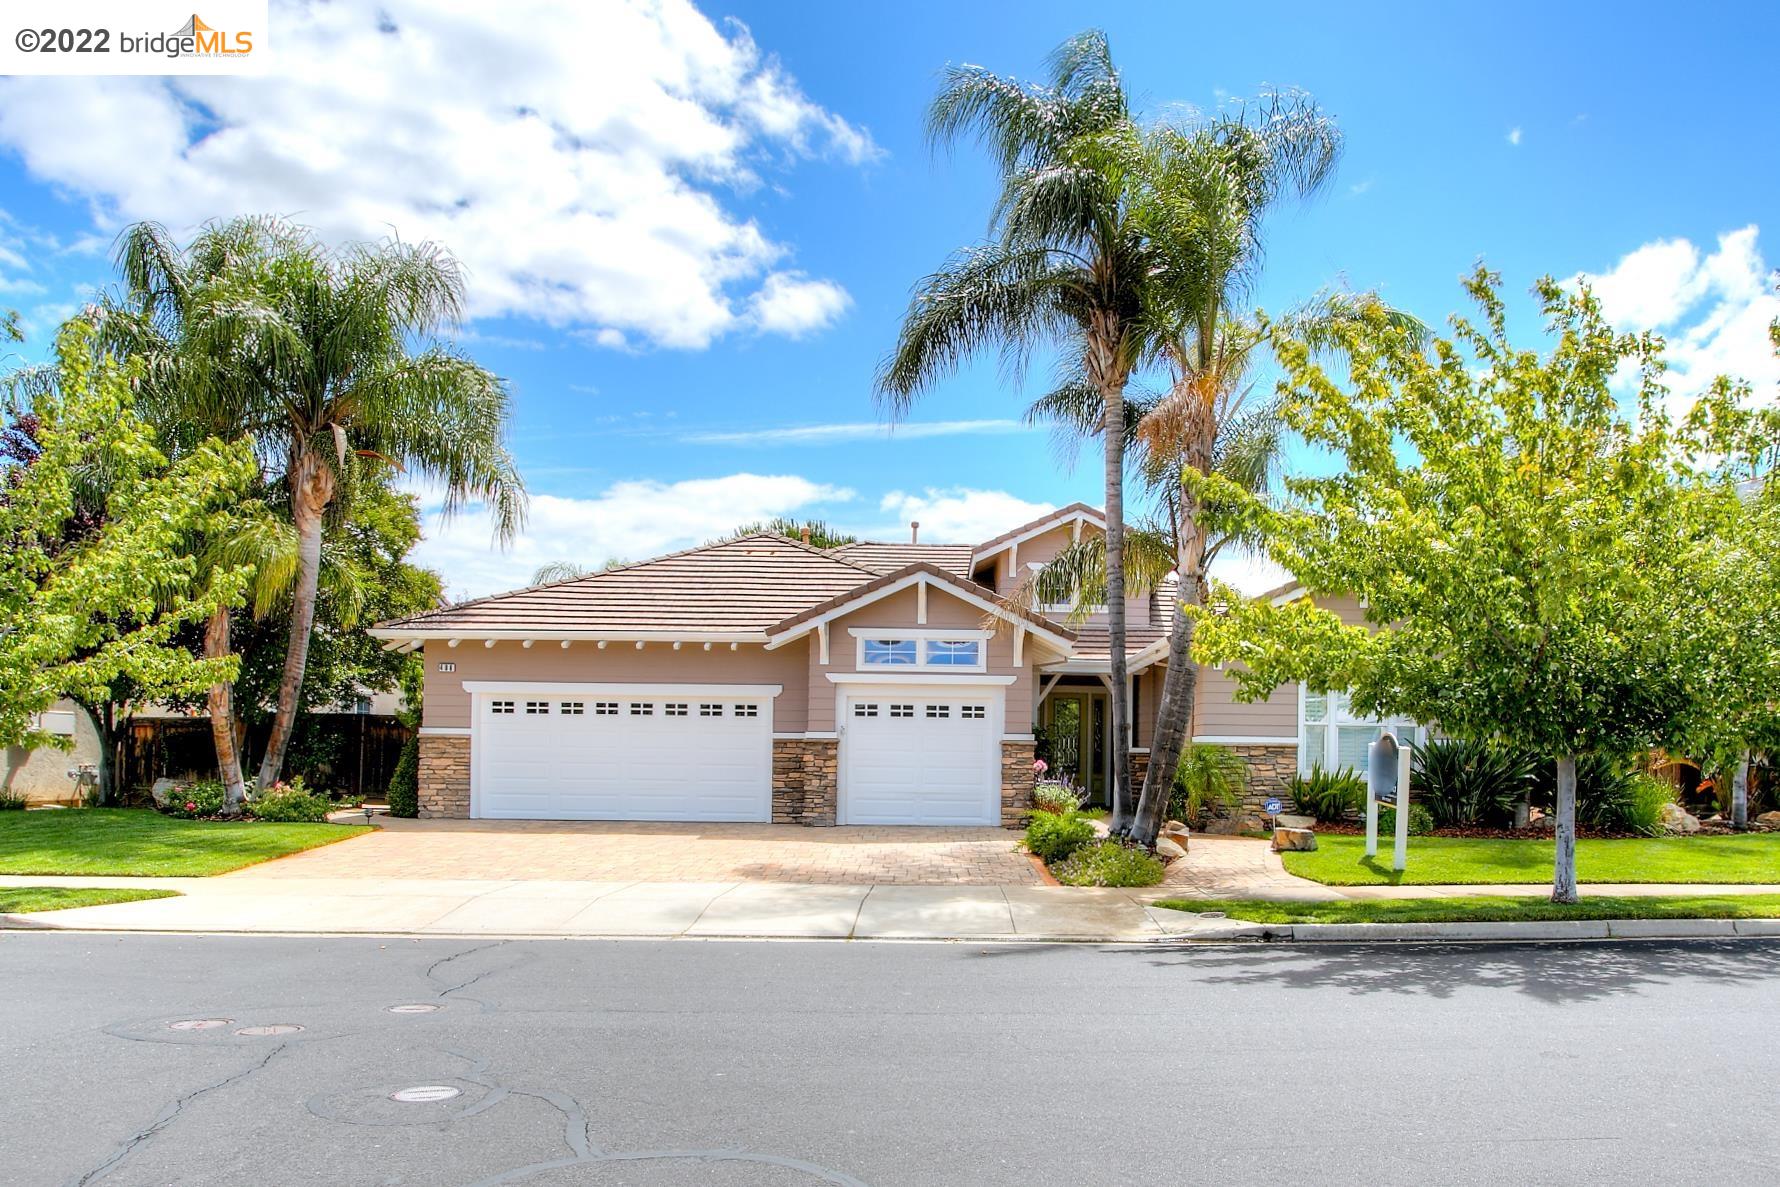 486 Lakeview Dr, BRENTWOOD, CA 94513